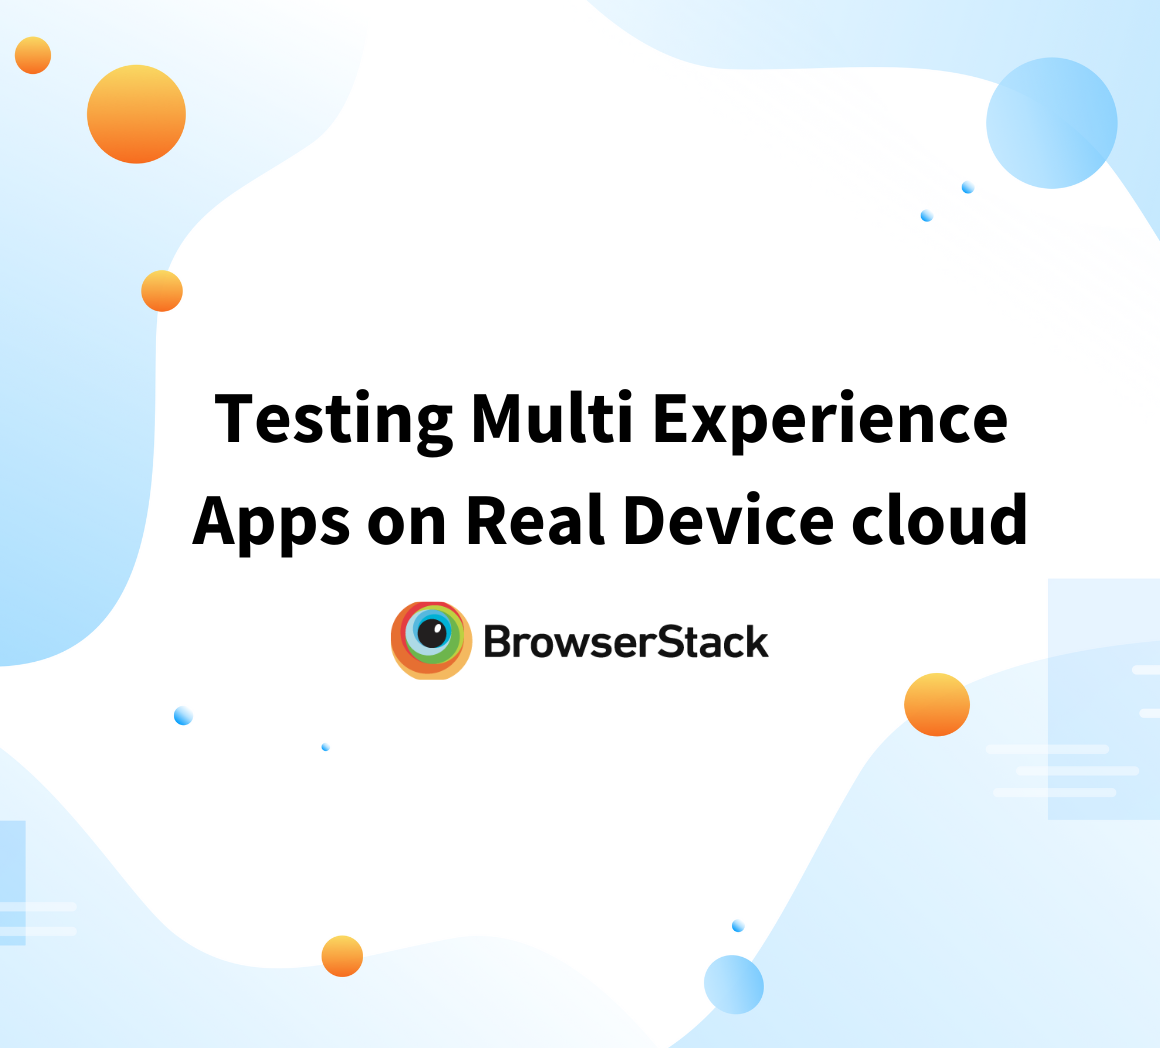 Testing Multi-Experience Apps on Real Device Cloud